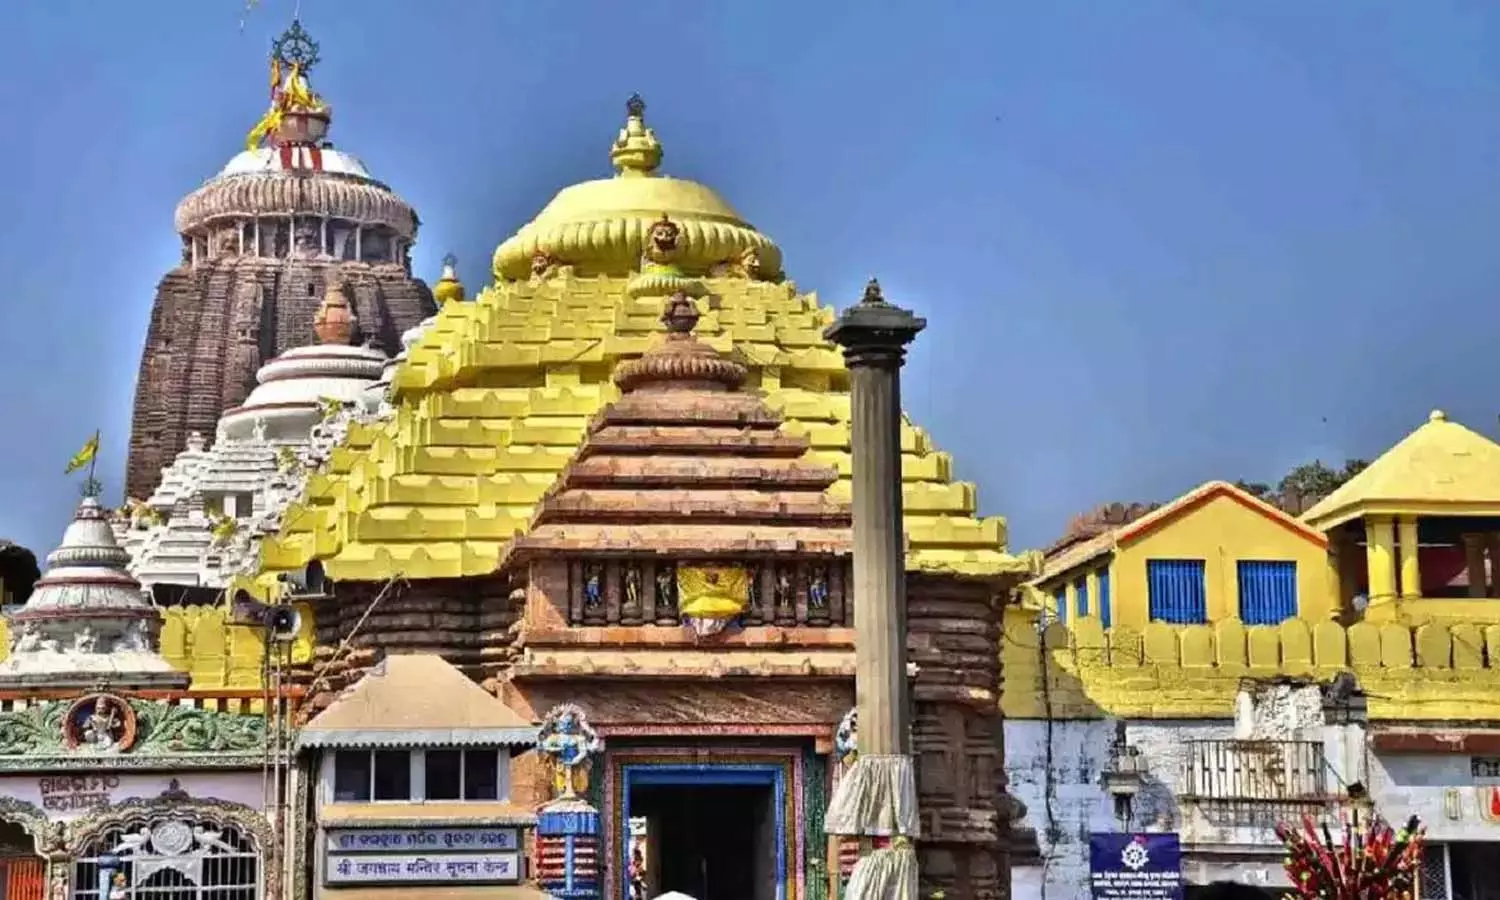 British citizen tried to forcibly enter Jagannath temple, police detained